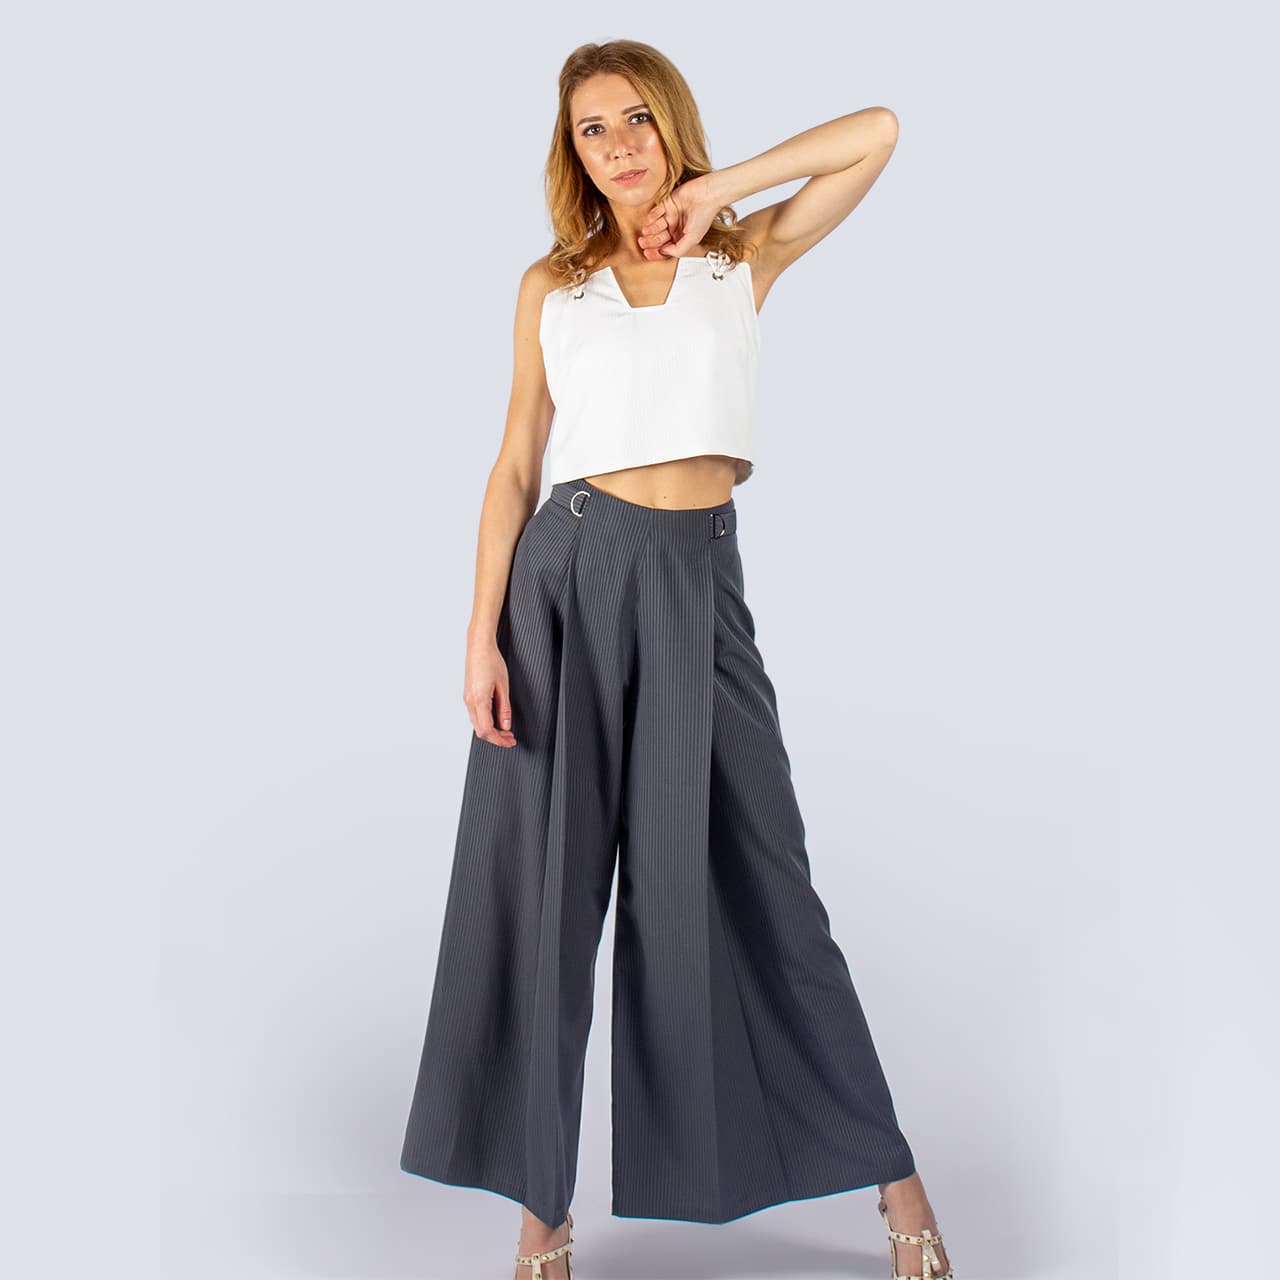 Grey Solid Semi-Formal Pants For Women - Set Of 2 - Buy Grey Solid Semi-Formal  Pants For Women - Set Of 2 at Best Price in SYBazzar